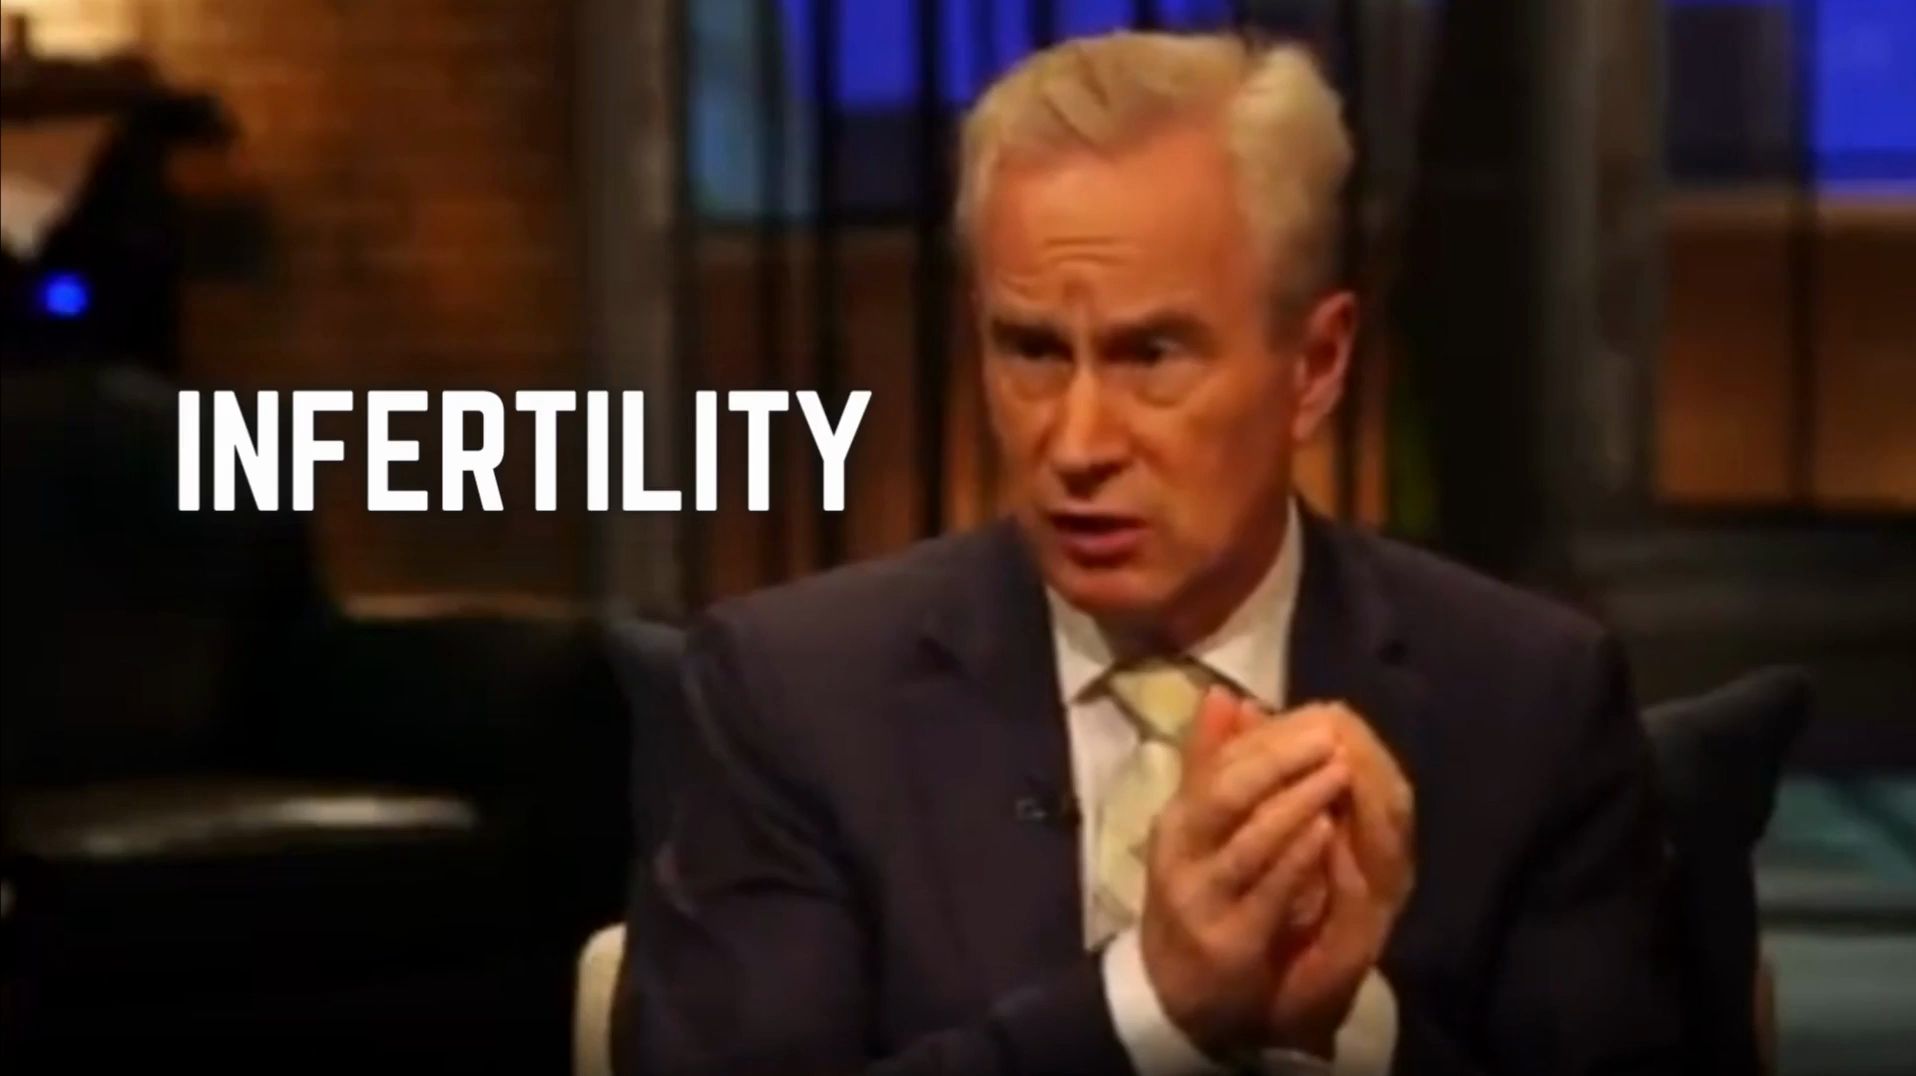 Dr Peter McCullough: COVID-19 “vaccine” induced infertility